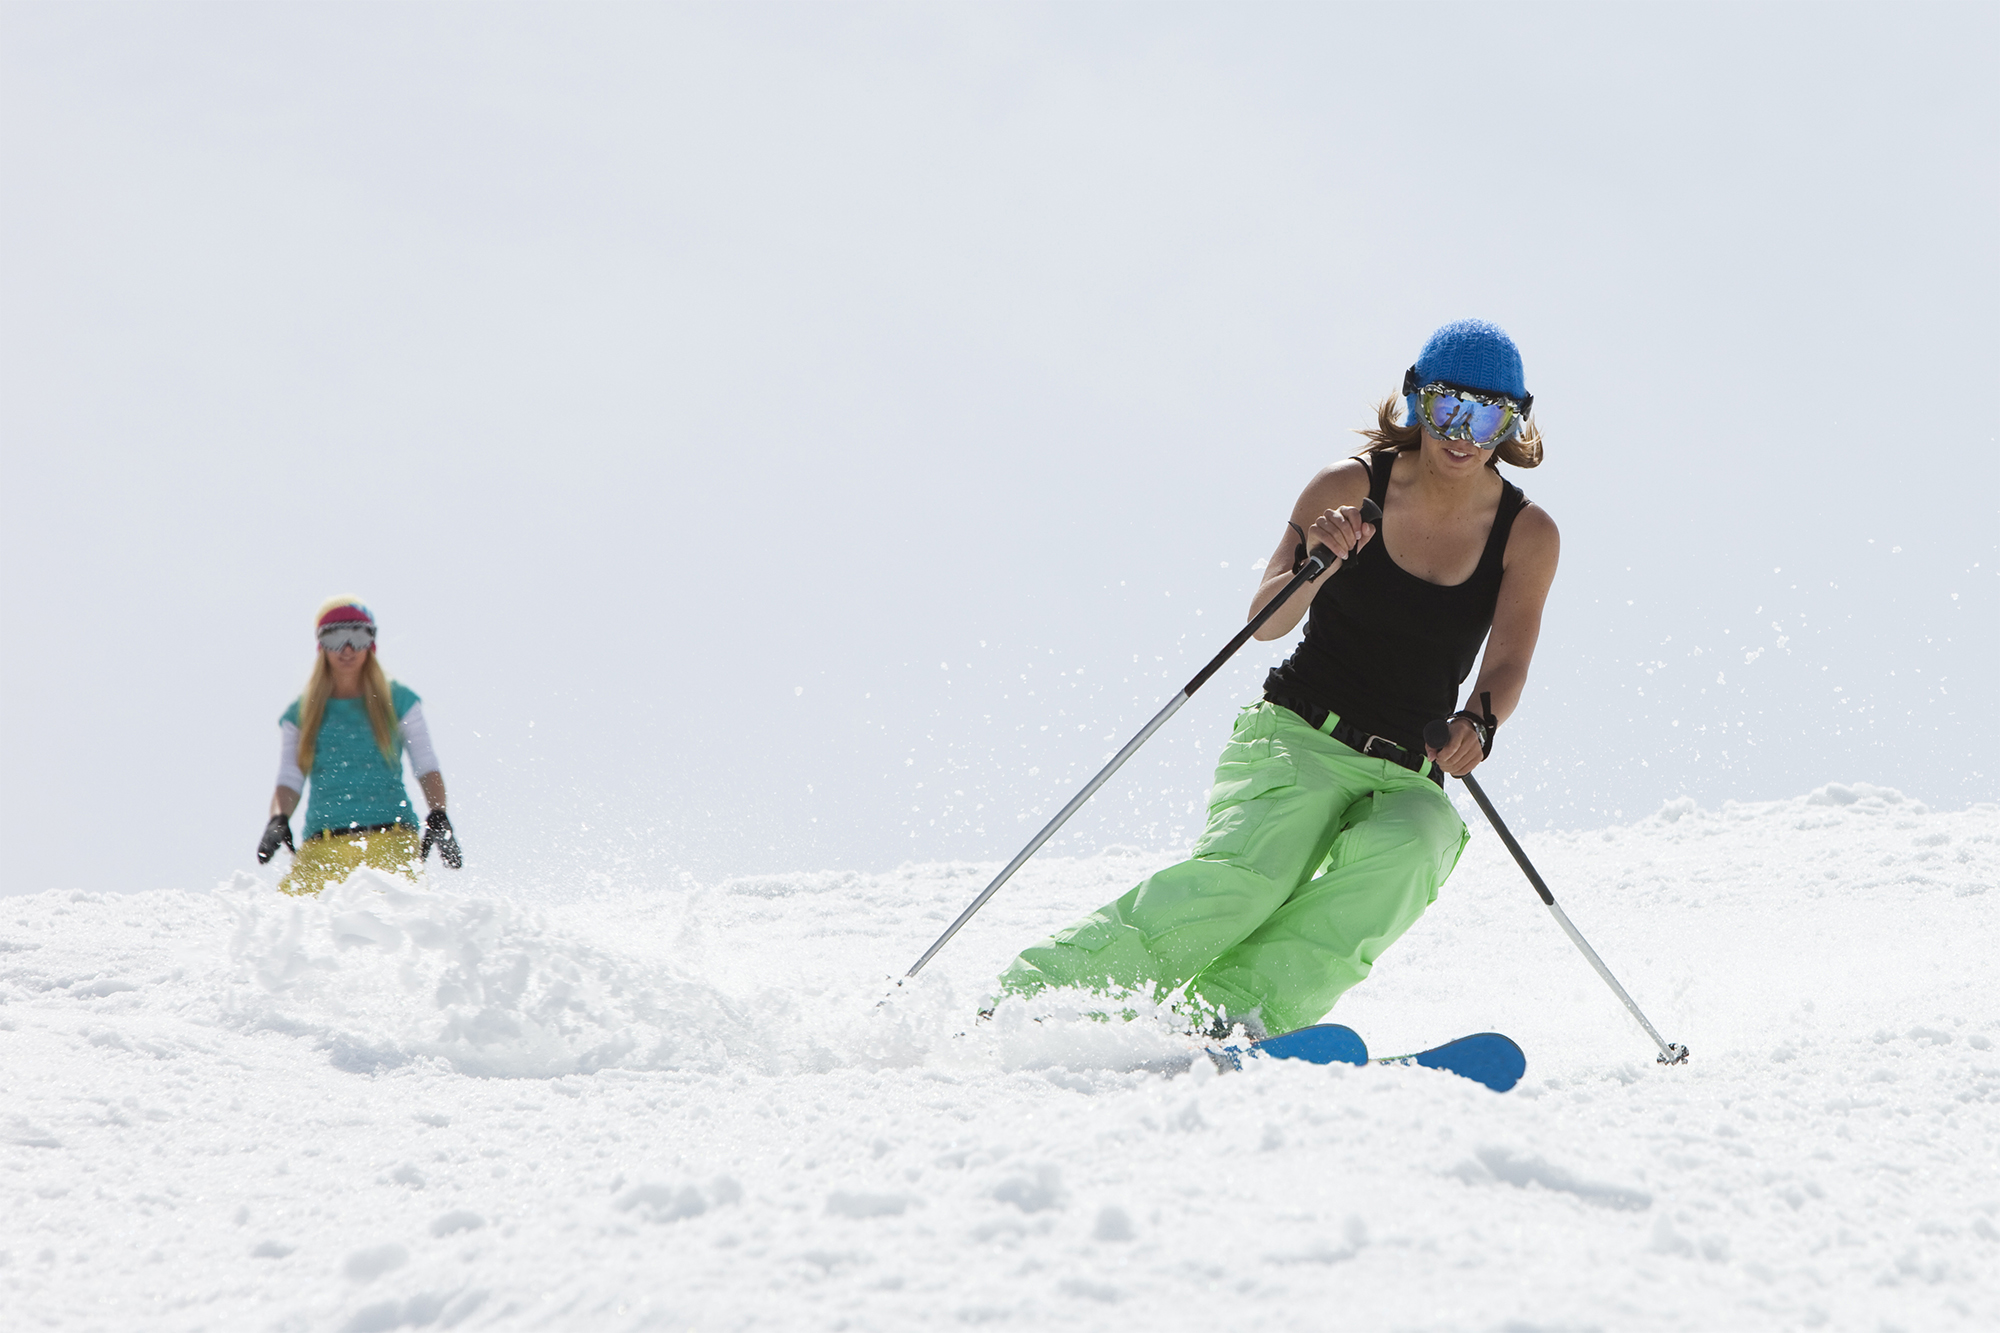 Young girls skiing together.